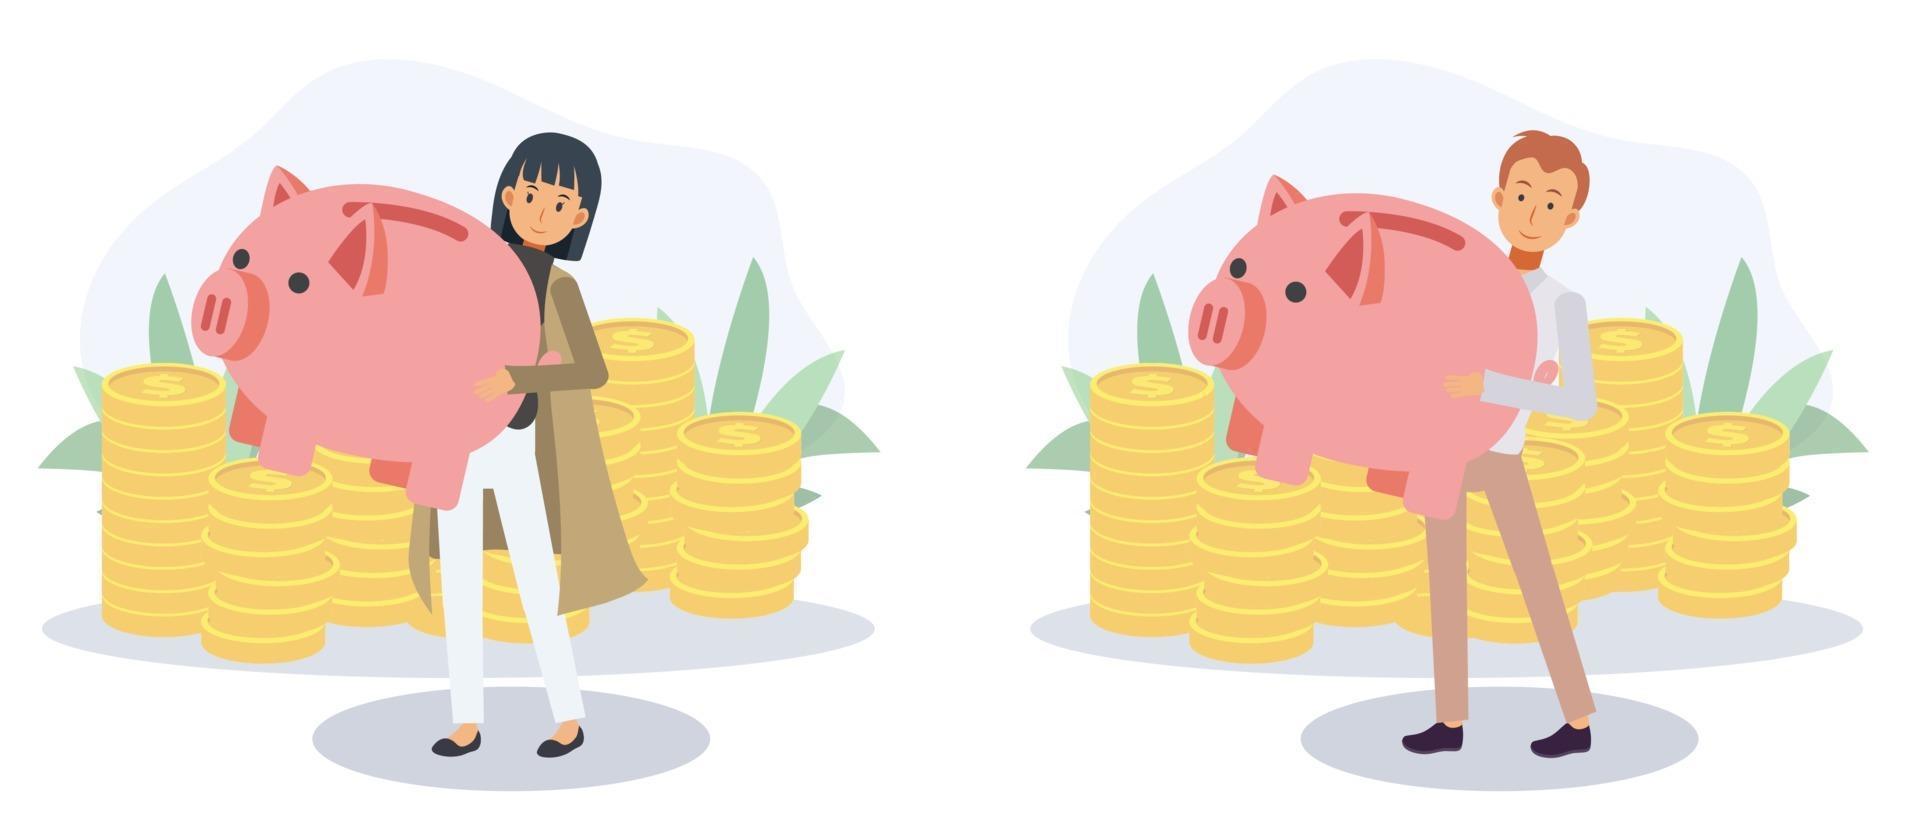 saving money.Economy and financial independence,saving money concept. vector